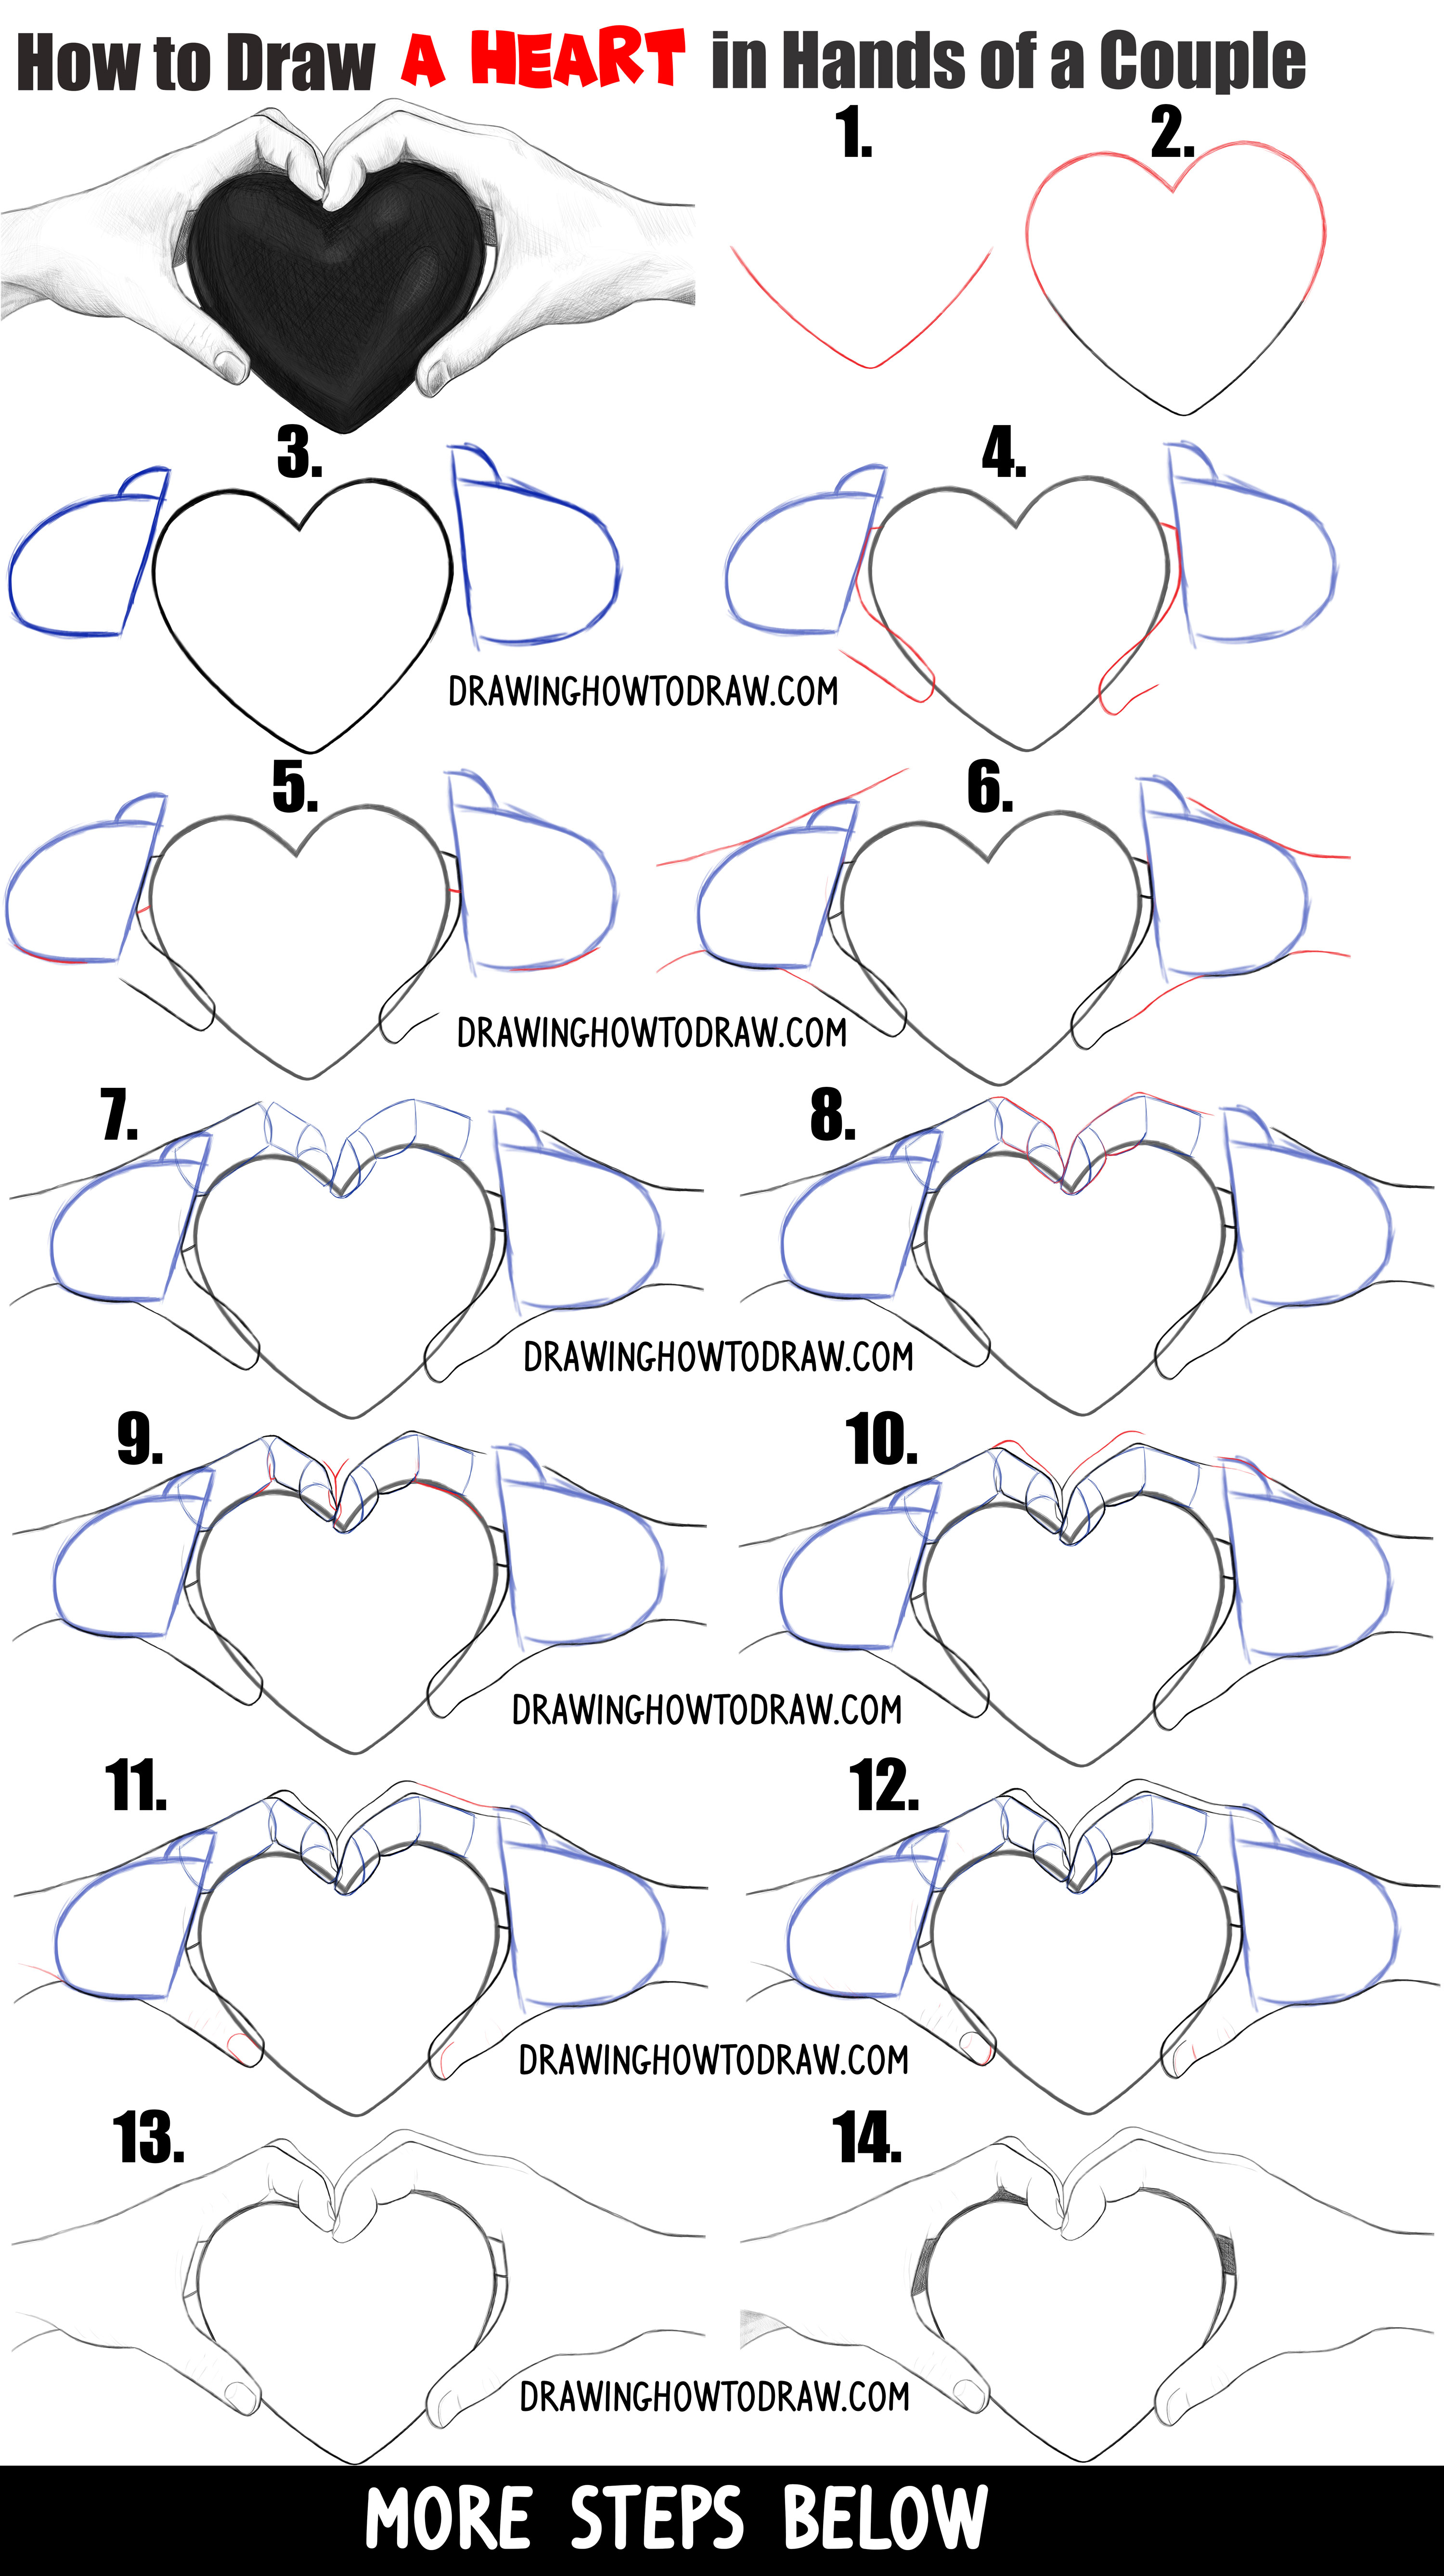 How to Draw Couple's Hands Holding a Heart for Valentine's Day Easy Step by Step Drawing Tutorial for Beginners